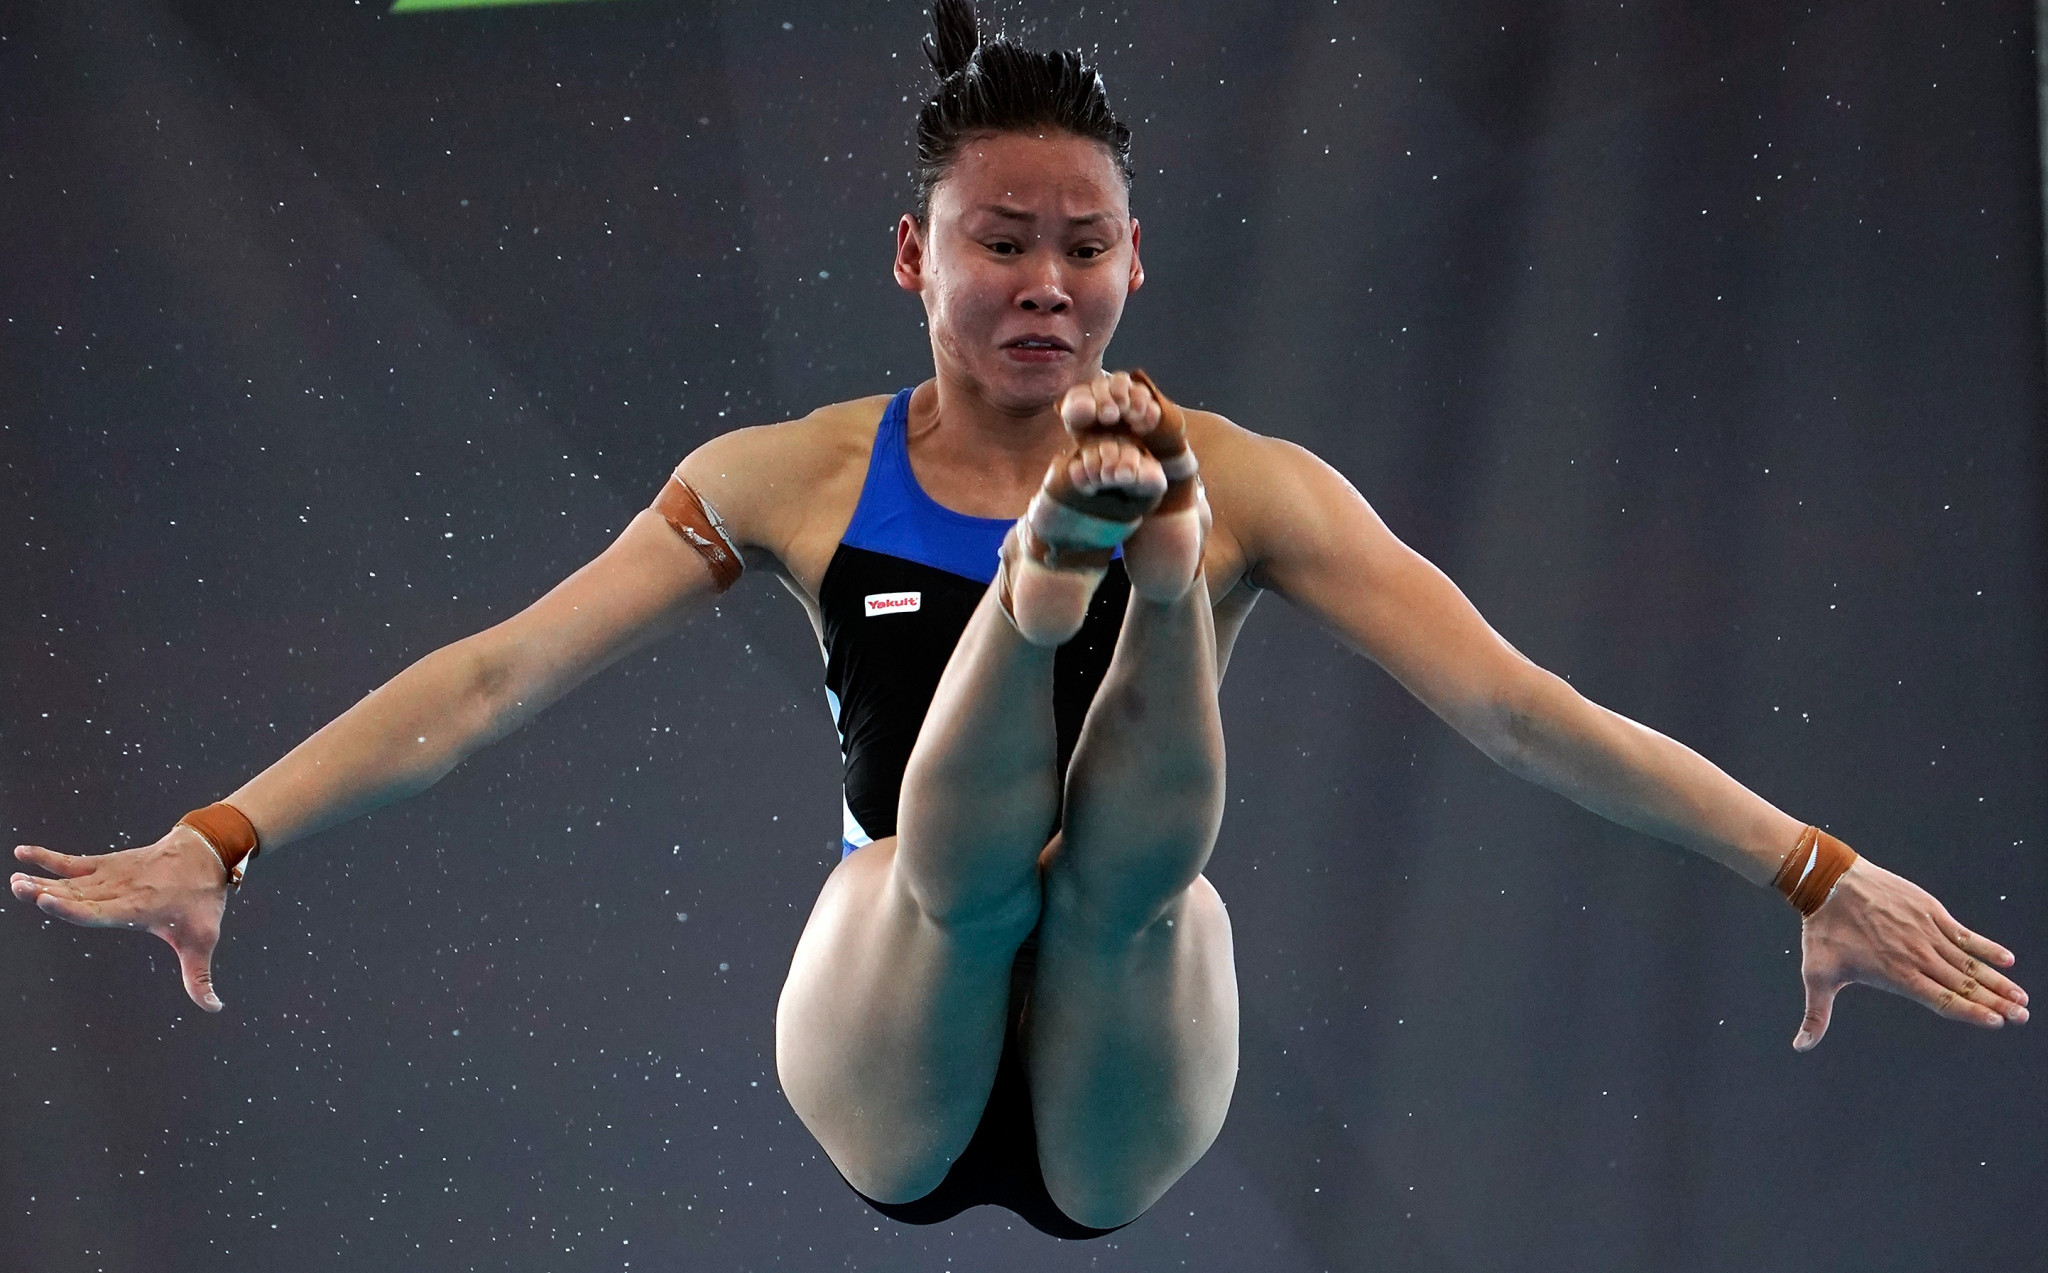 Rinong aims to deliver home success at FINA Diving Grand Prix